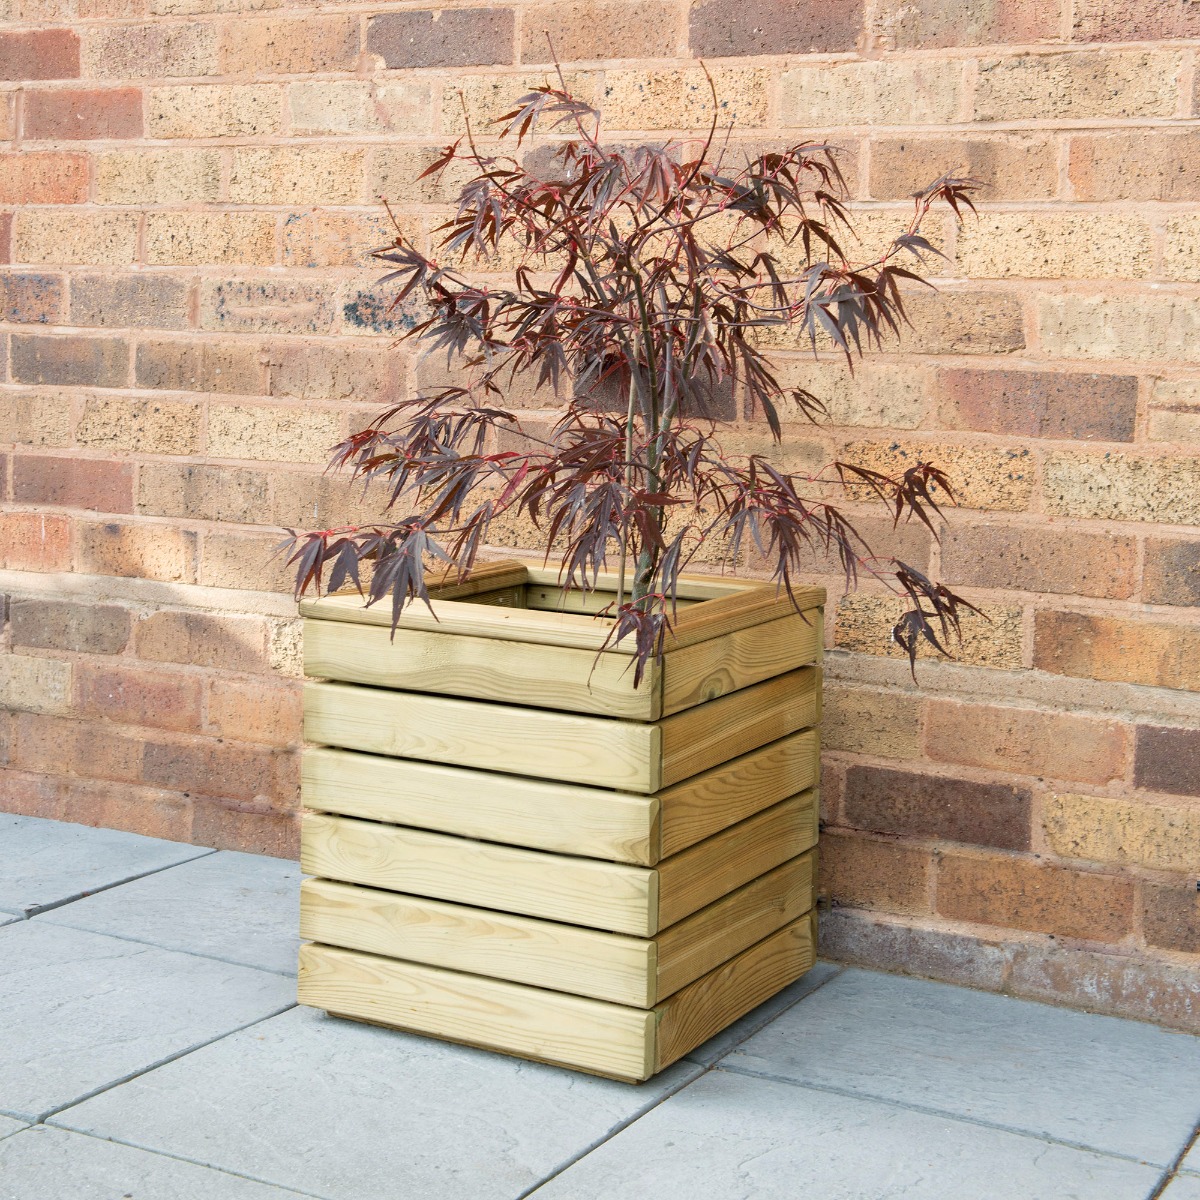 Forest Linear Square Wooden Garden Planter 1'x1' (0.4x0.4m) from Buy Sheds Direct